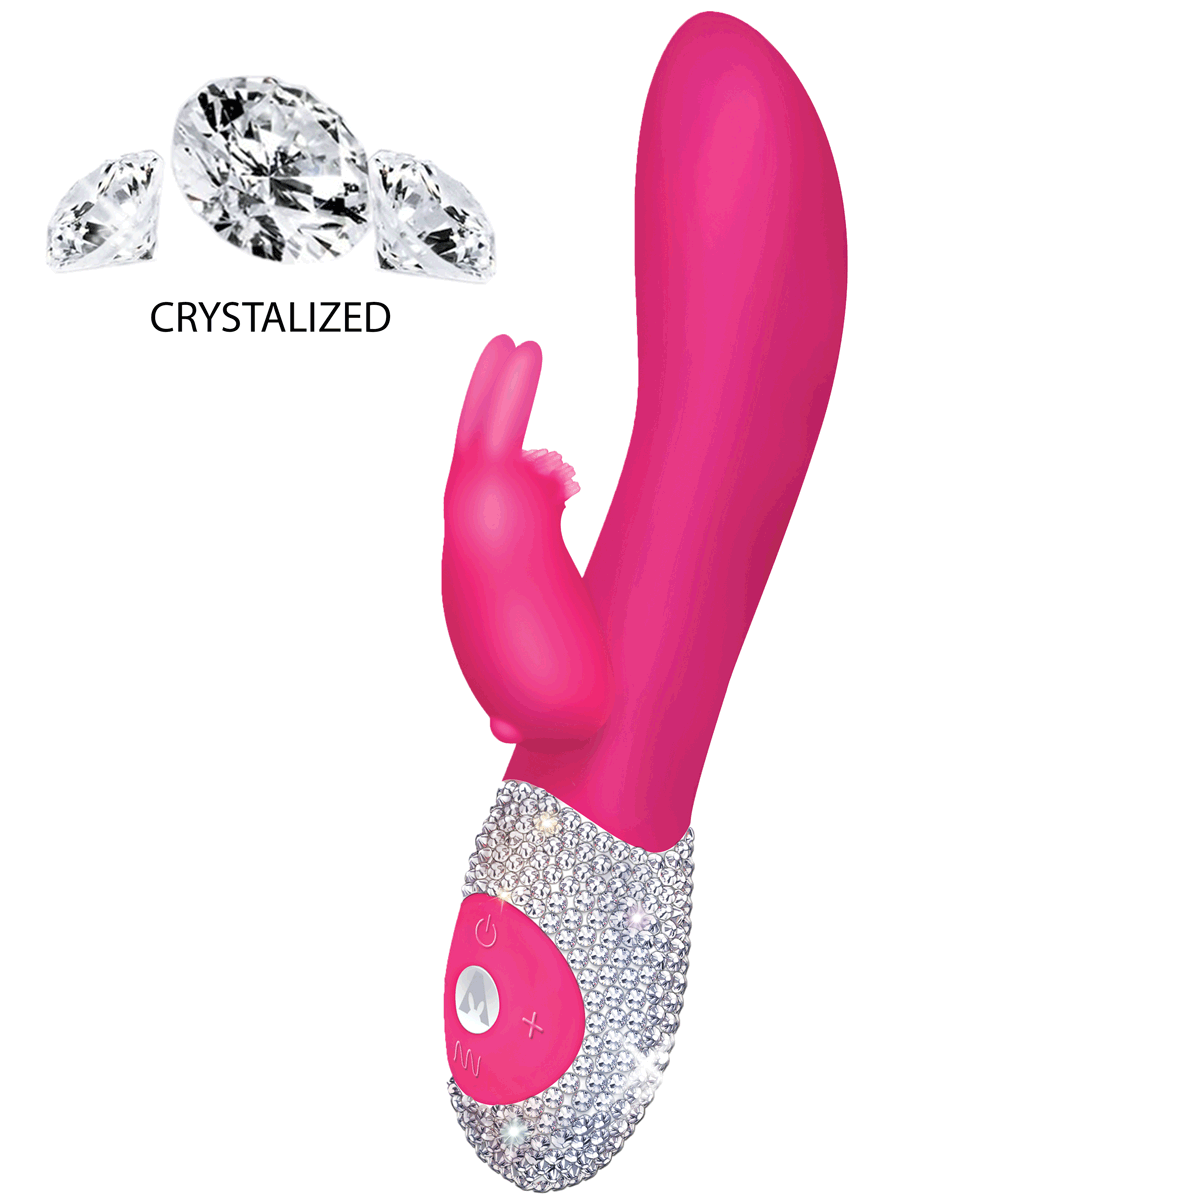 The Rabbit Company Limited Edition Crystalized Rabbit - Pink